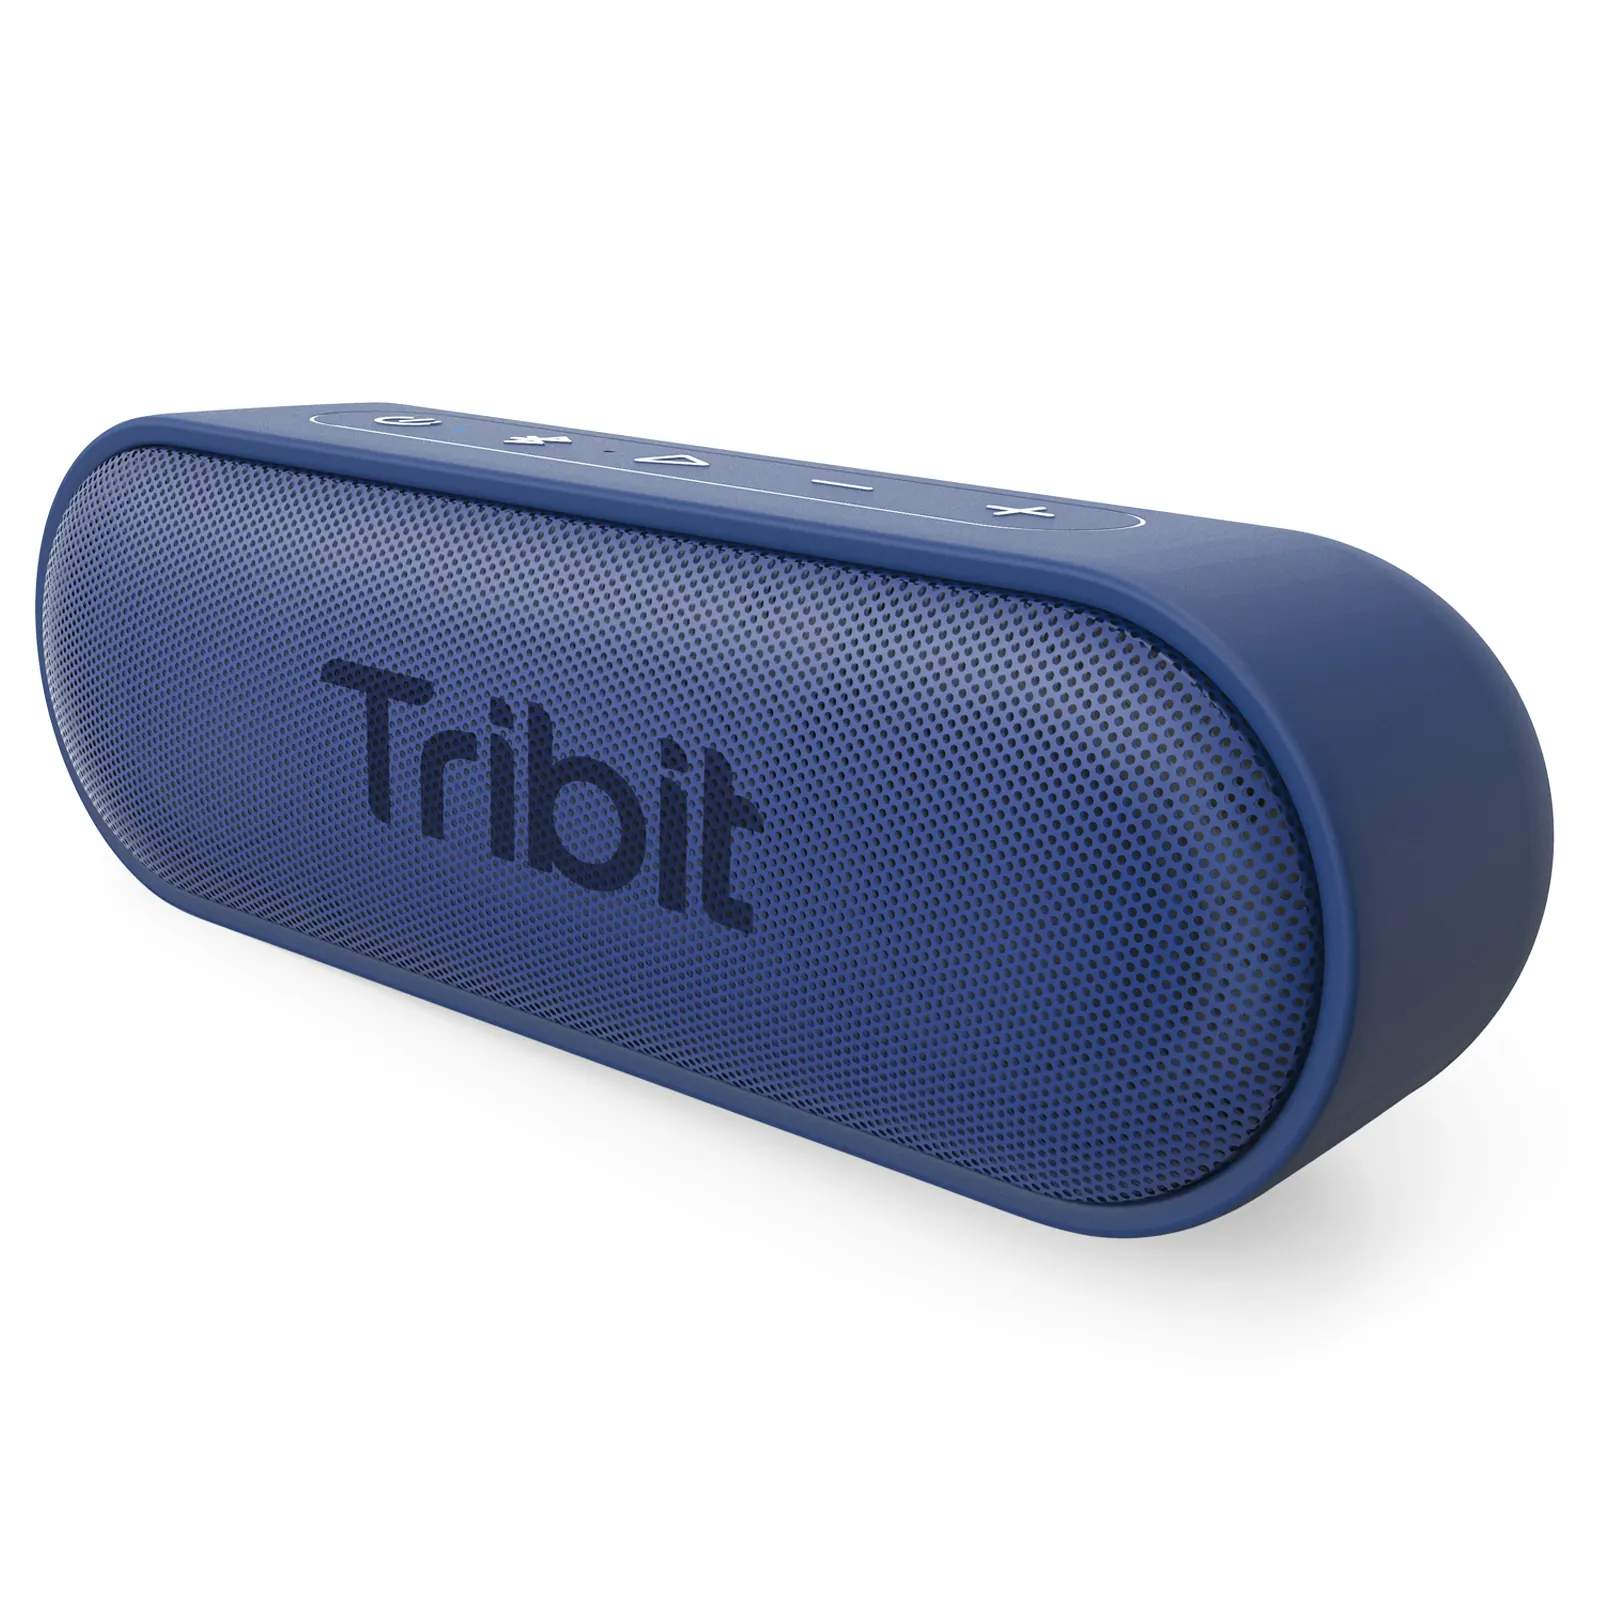 Tribit XSound Go Outdoorsワイヤレスマイクミニスピーカーワイヤレスステレオペアリング充電式スピーカー